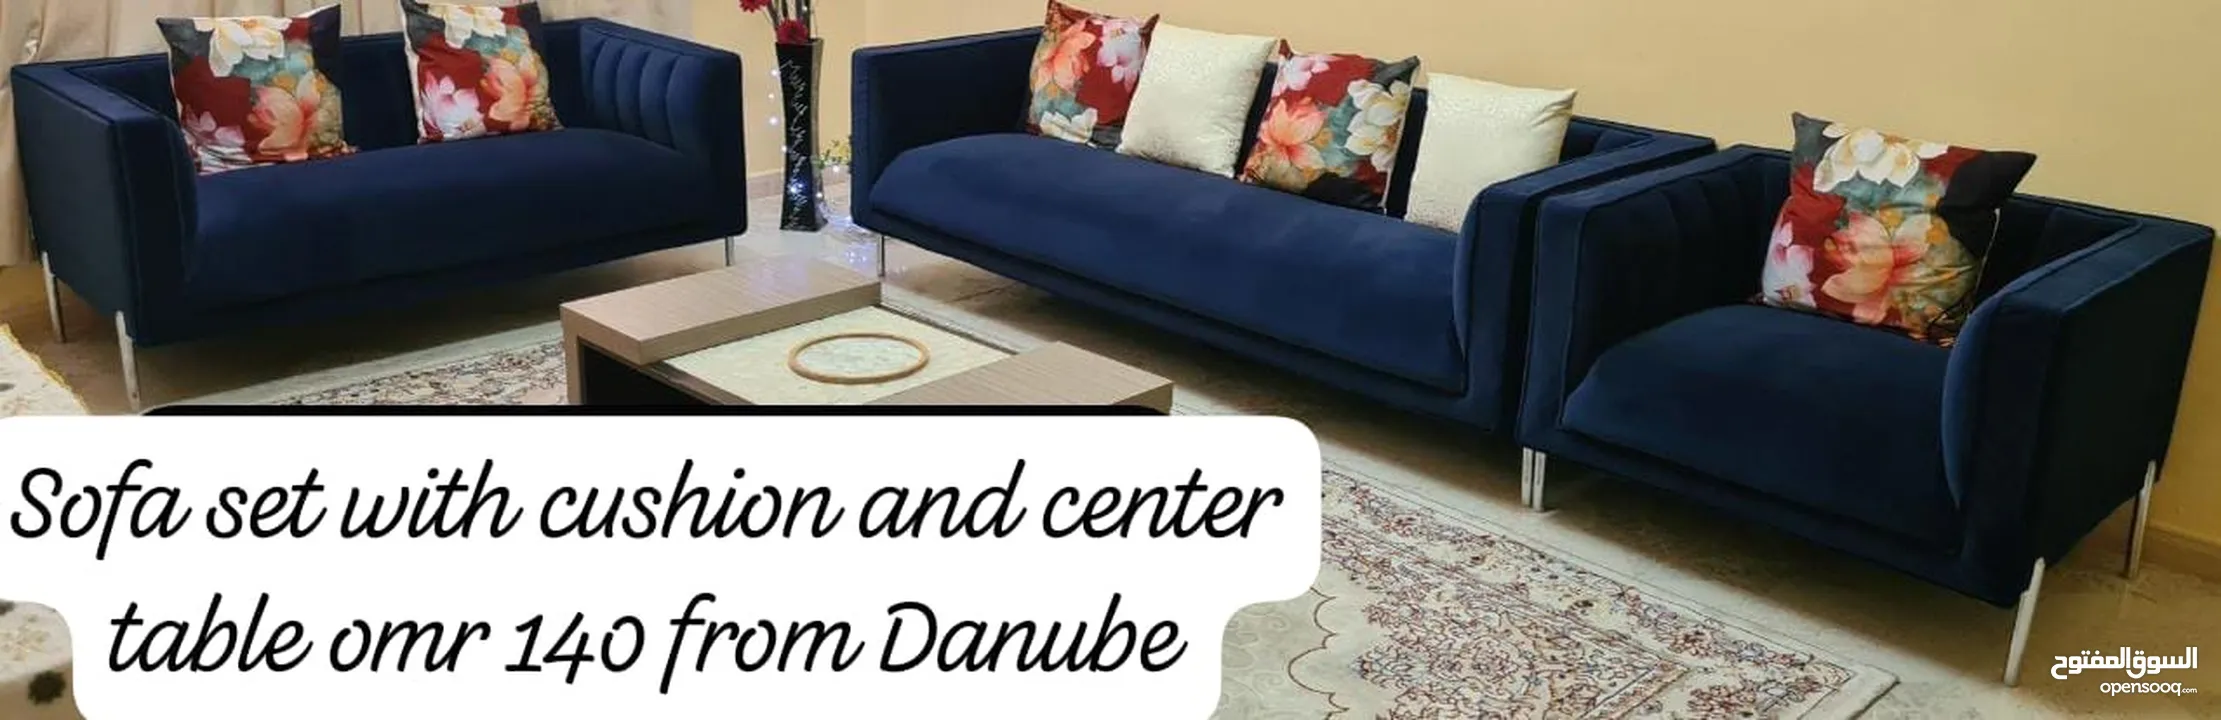 Sofa set with center table and cushions from Danube for 140 riyals